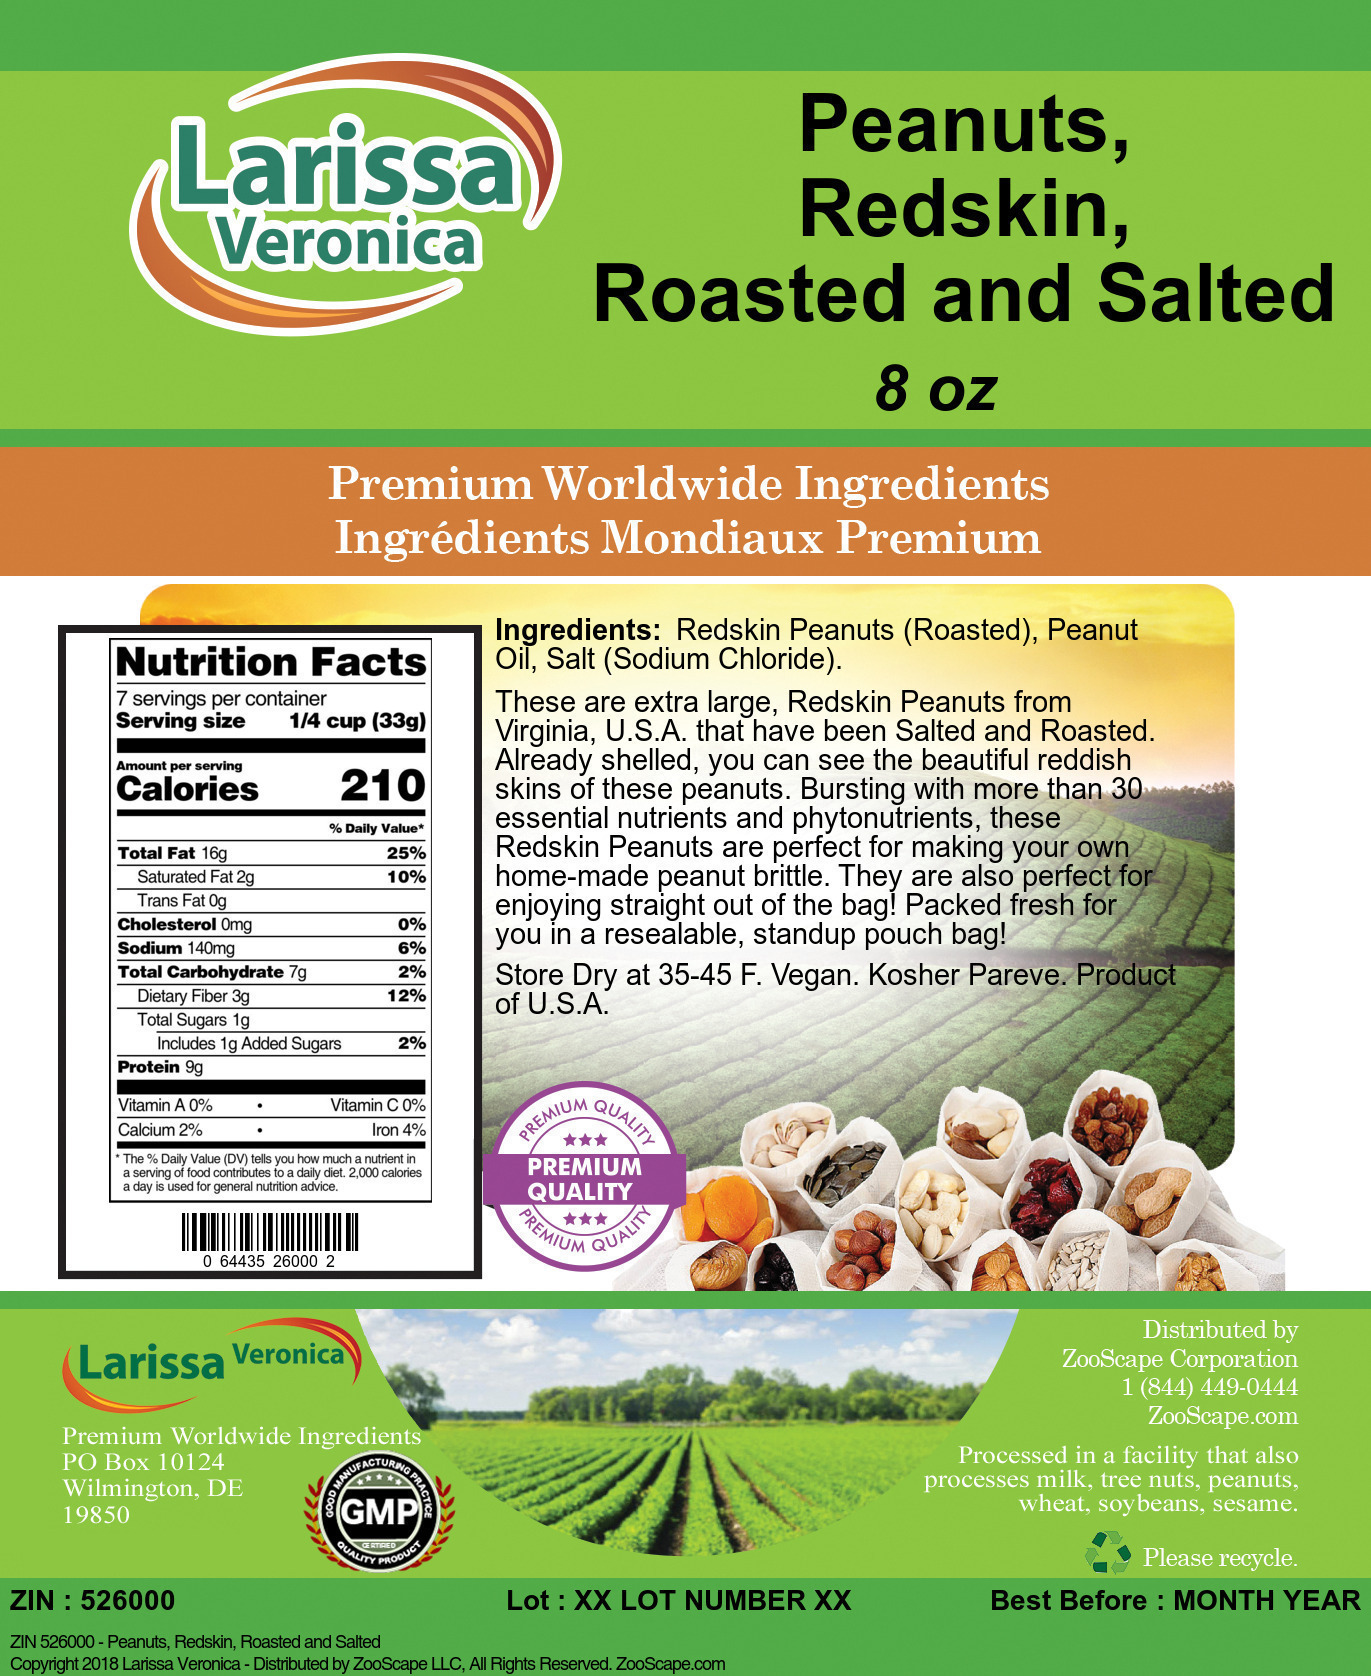 Peanuts, Redskin, Roasted and Salted - Label